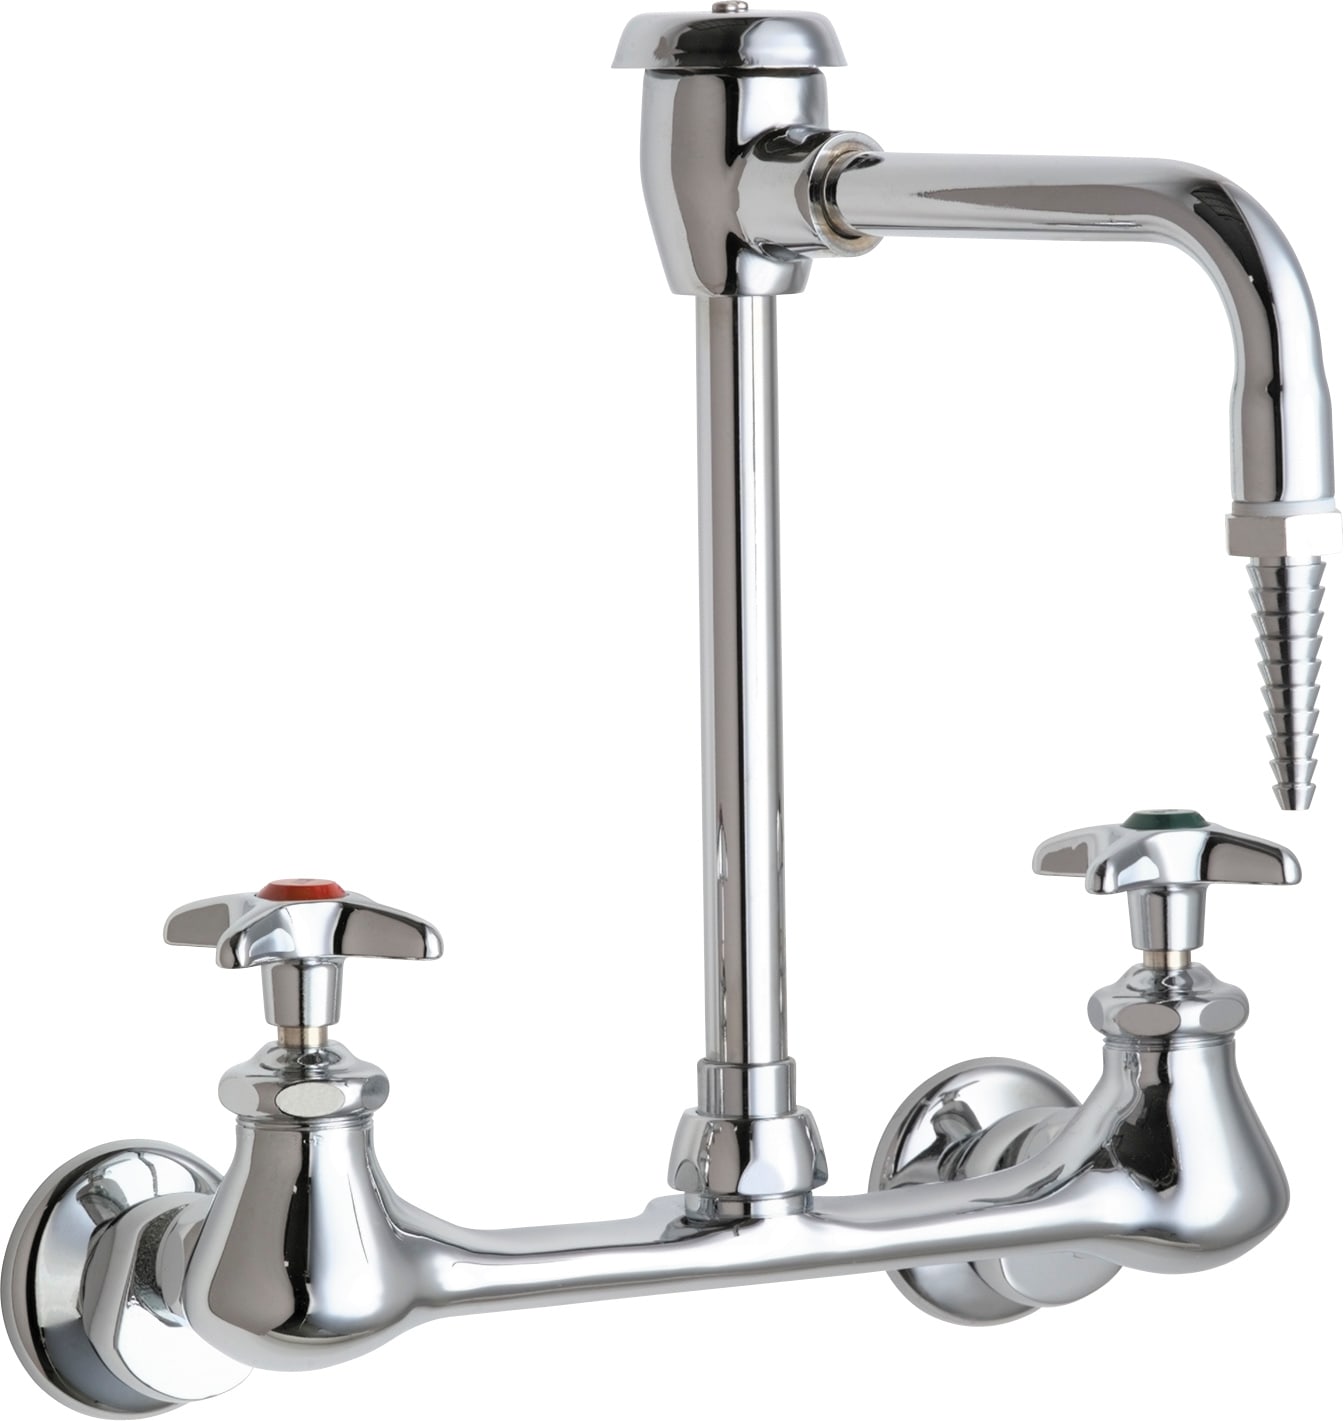 Chicago Faucets 943 Cp Chrome Wall Mounted Lab Faucet With Cross